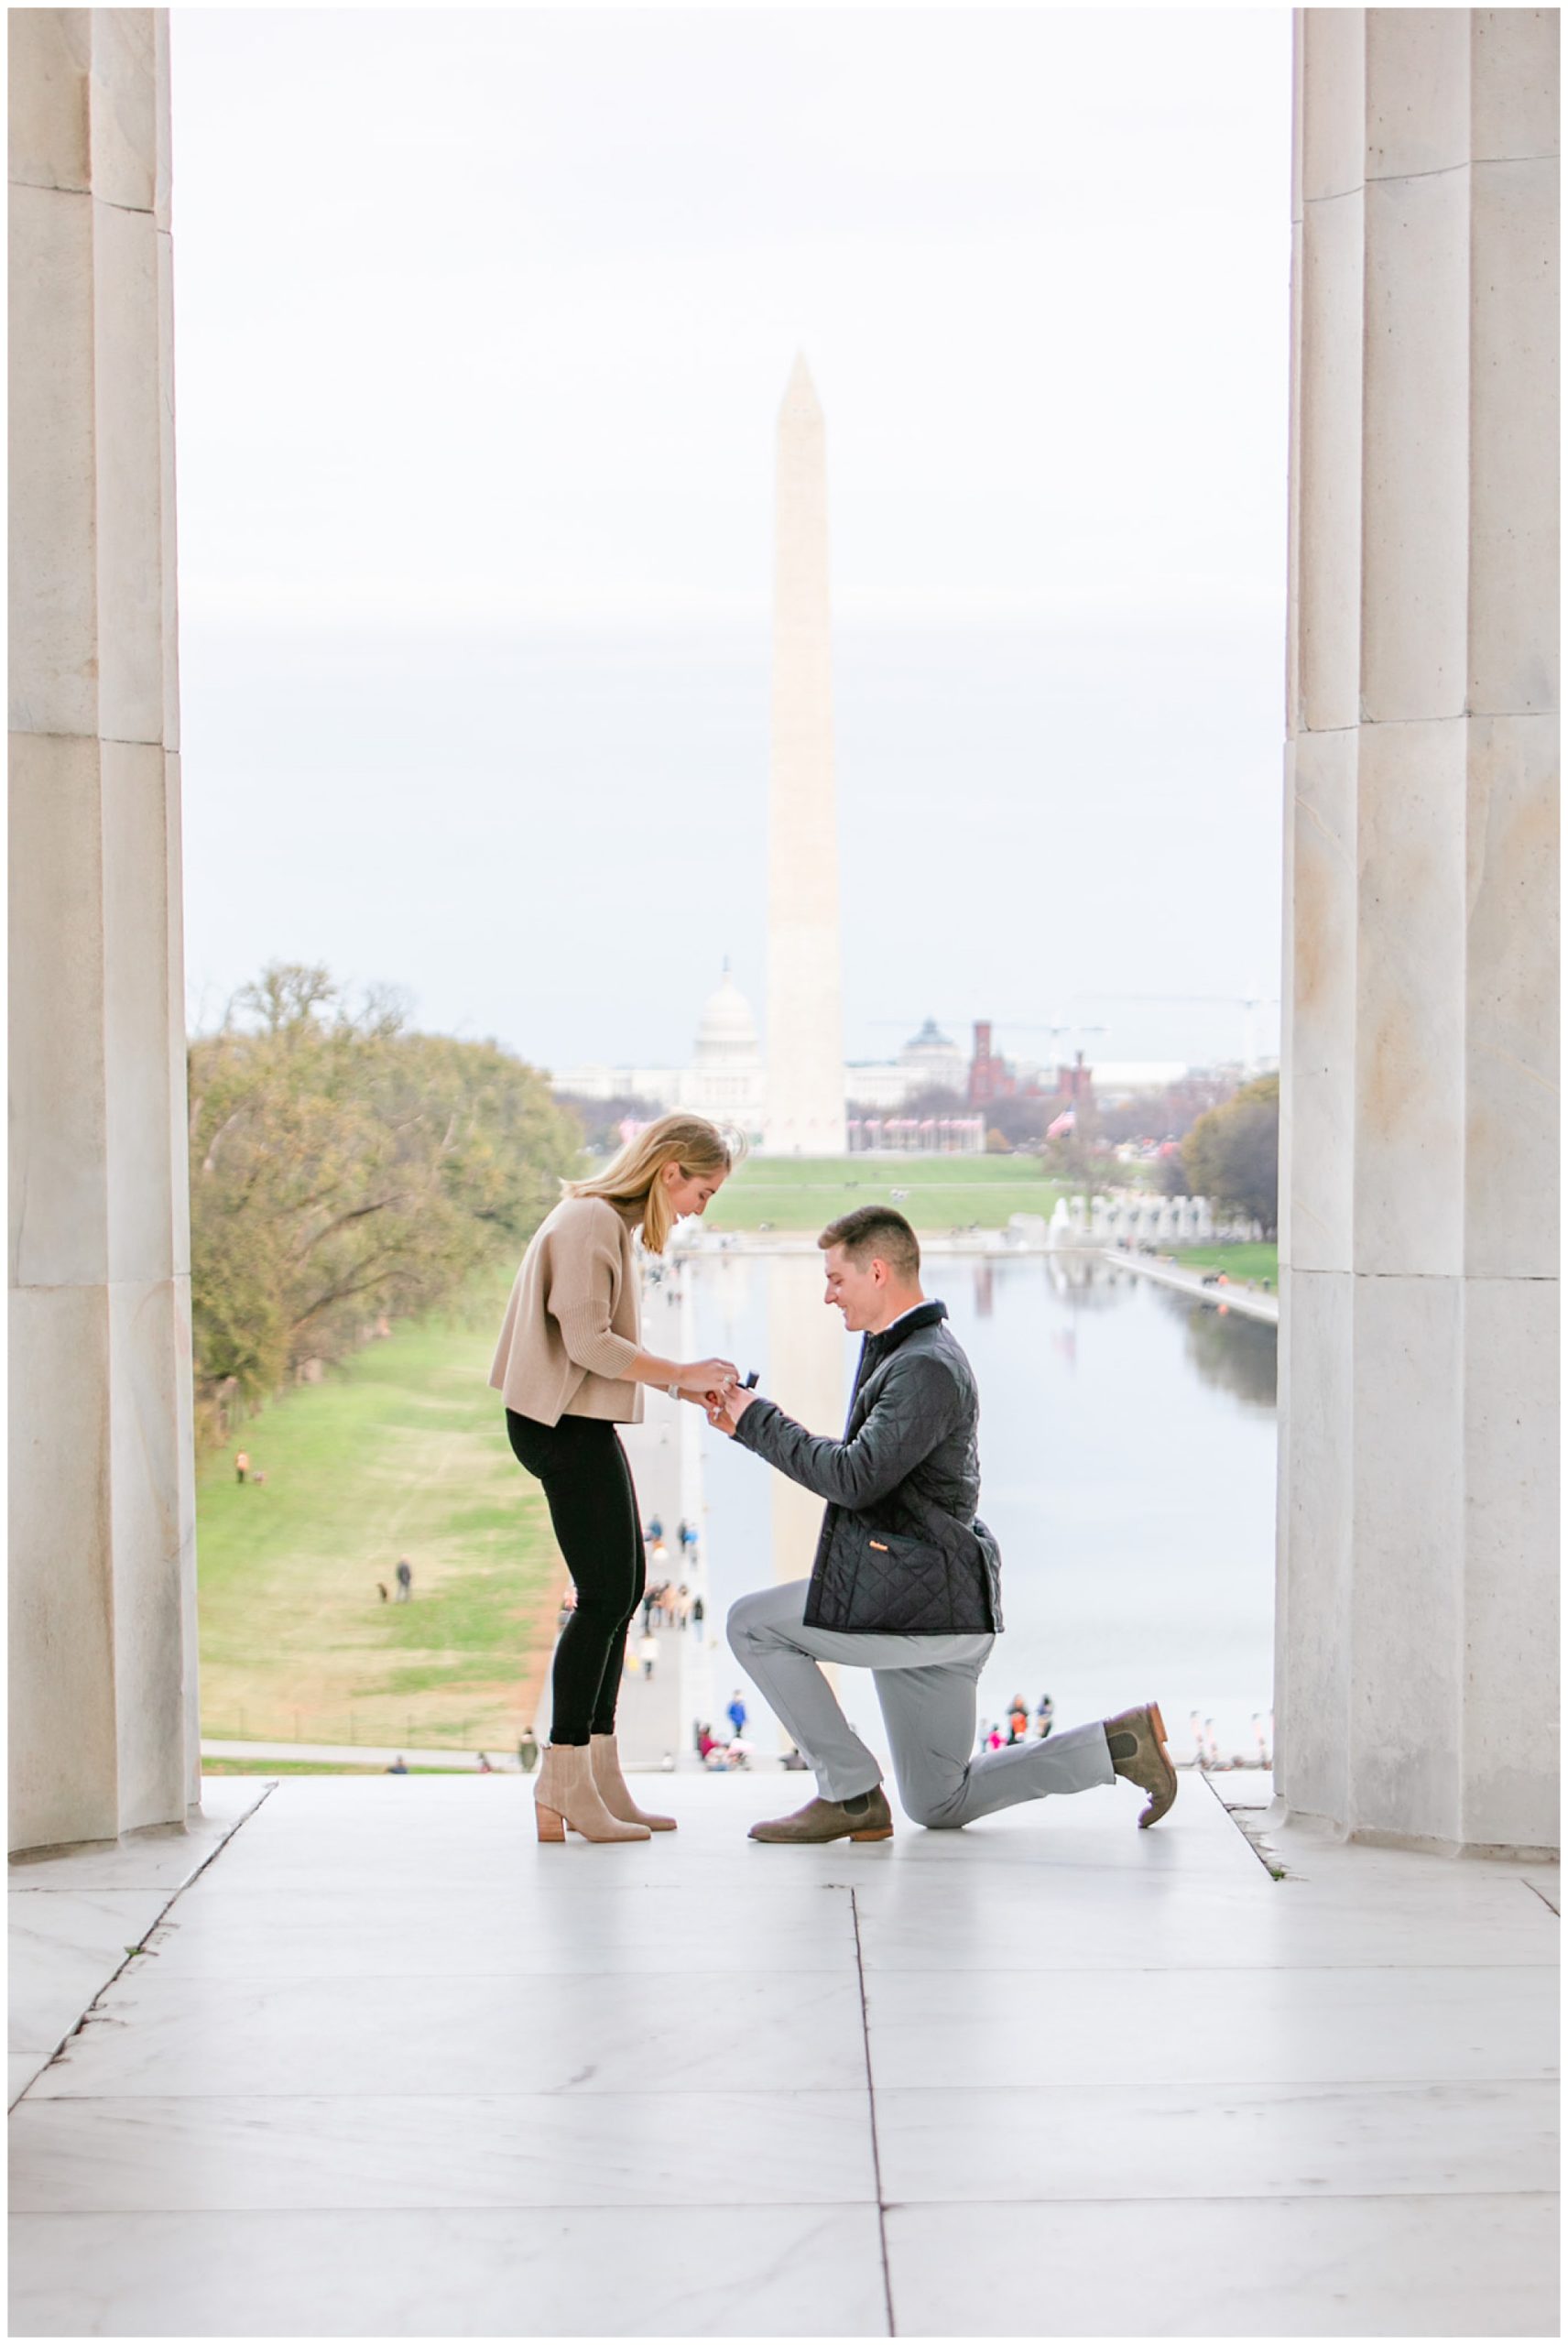 Lincoln Memorial surprise proposal, Lincoln Memorial proposal, National Mall proposal, Washington DC proposal, Washington DC proposal photographer, Washington DC wedding photographer, DC engagement photos, Rachel E.H. Photography, casual proposal photos, proposal portraits, natural light proposal, Lincoln Memorial, National Mall, Washington Monument, down on one knee